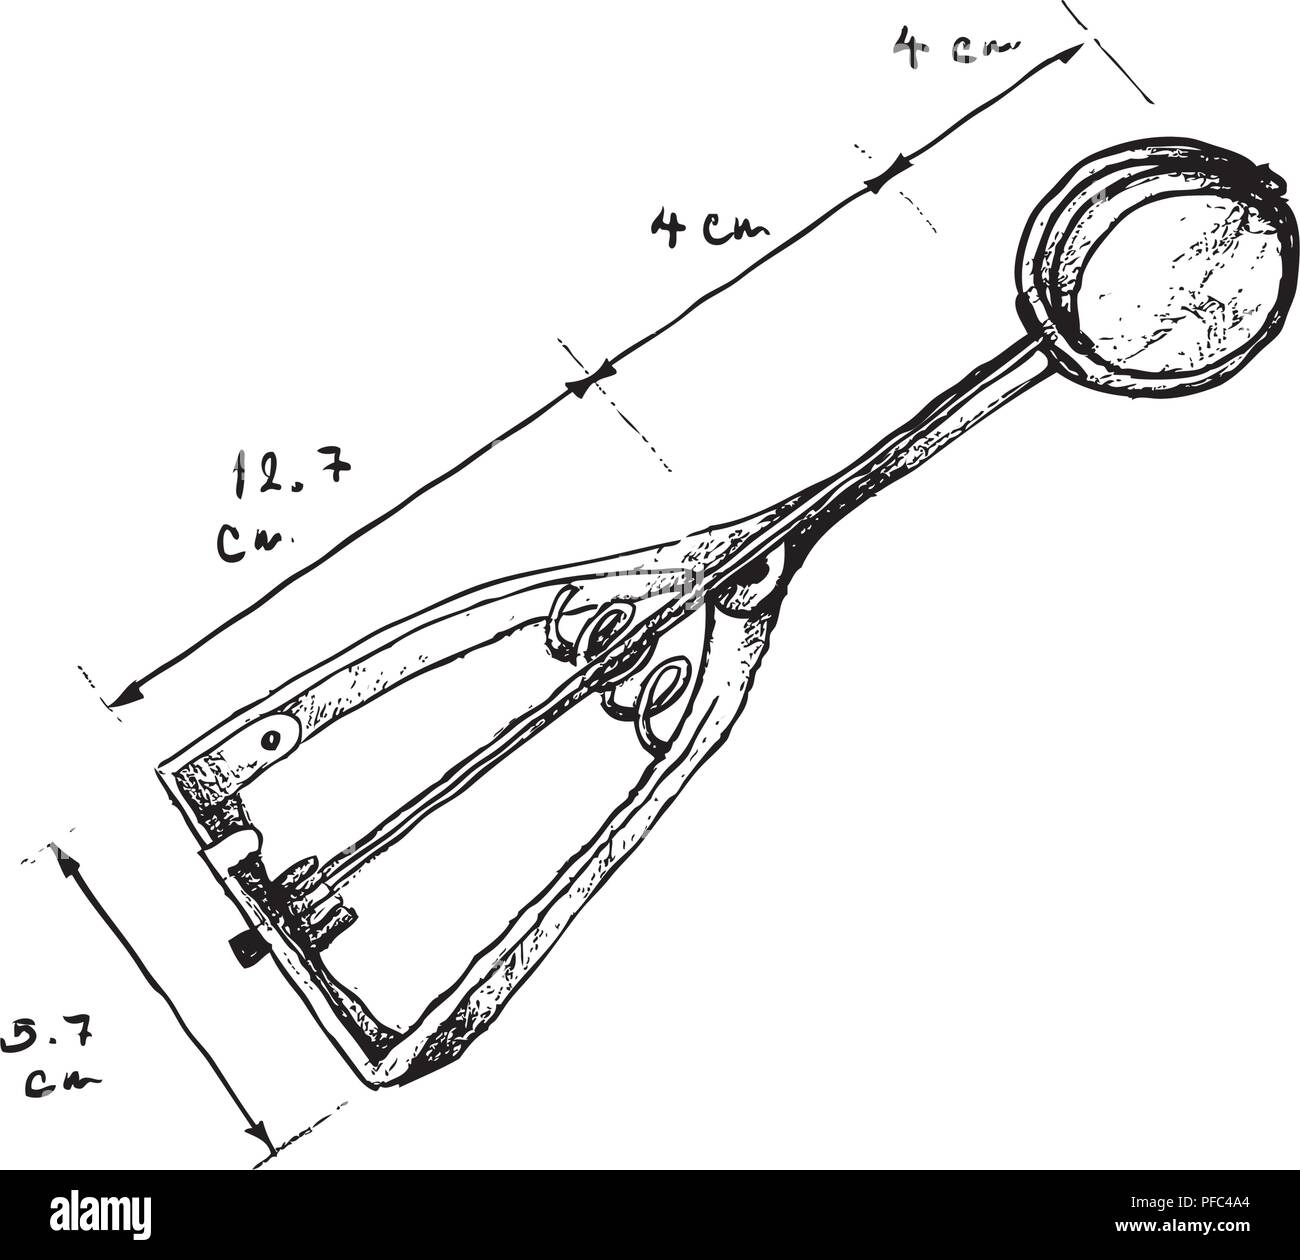 Illustration Hand Drawn Sketch Dimension of Disher Scoop Sizes or